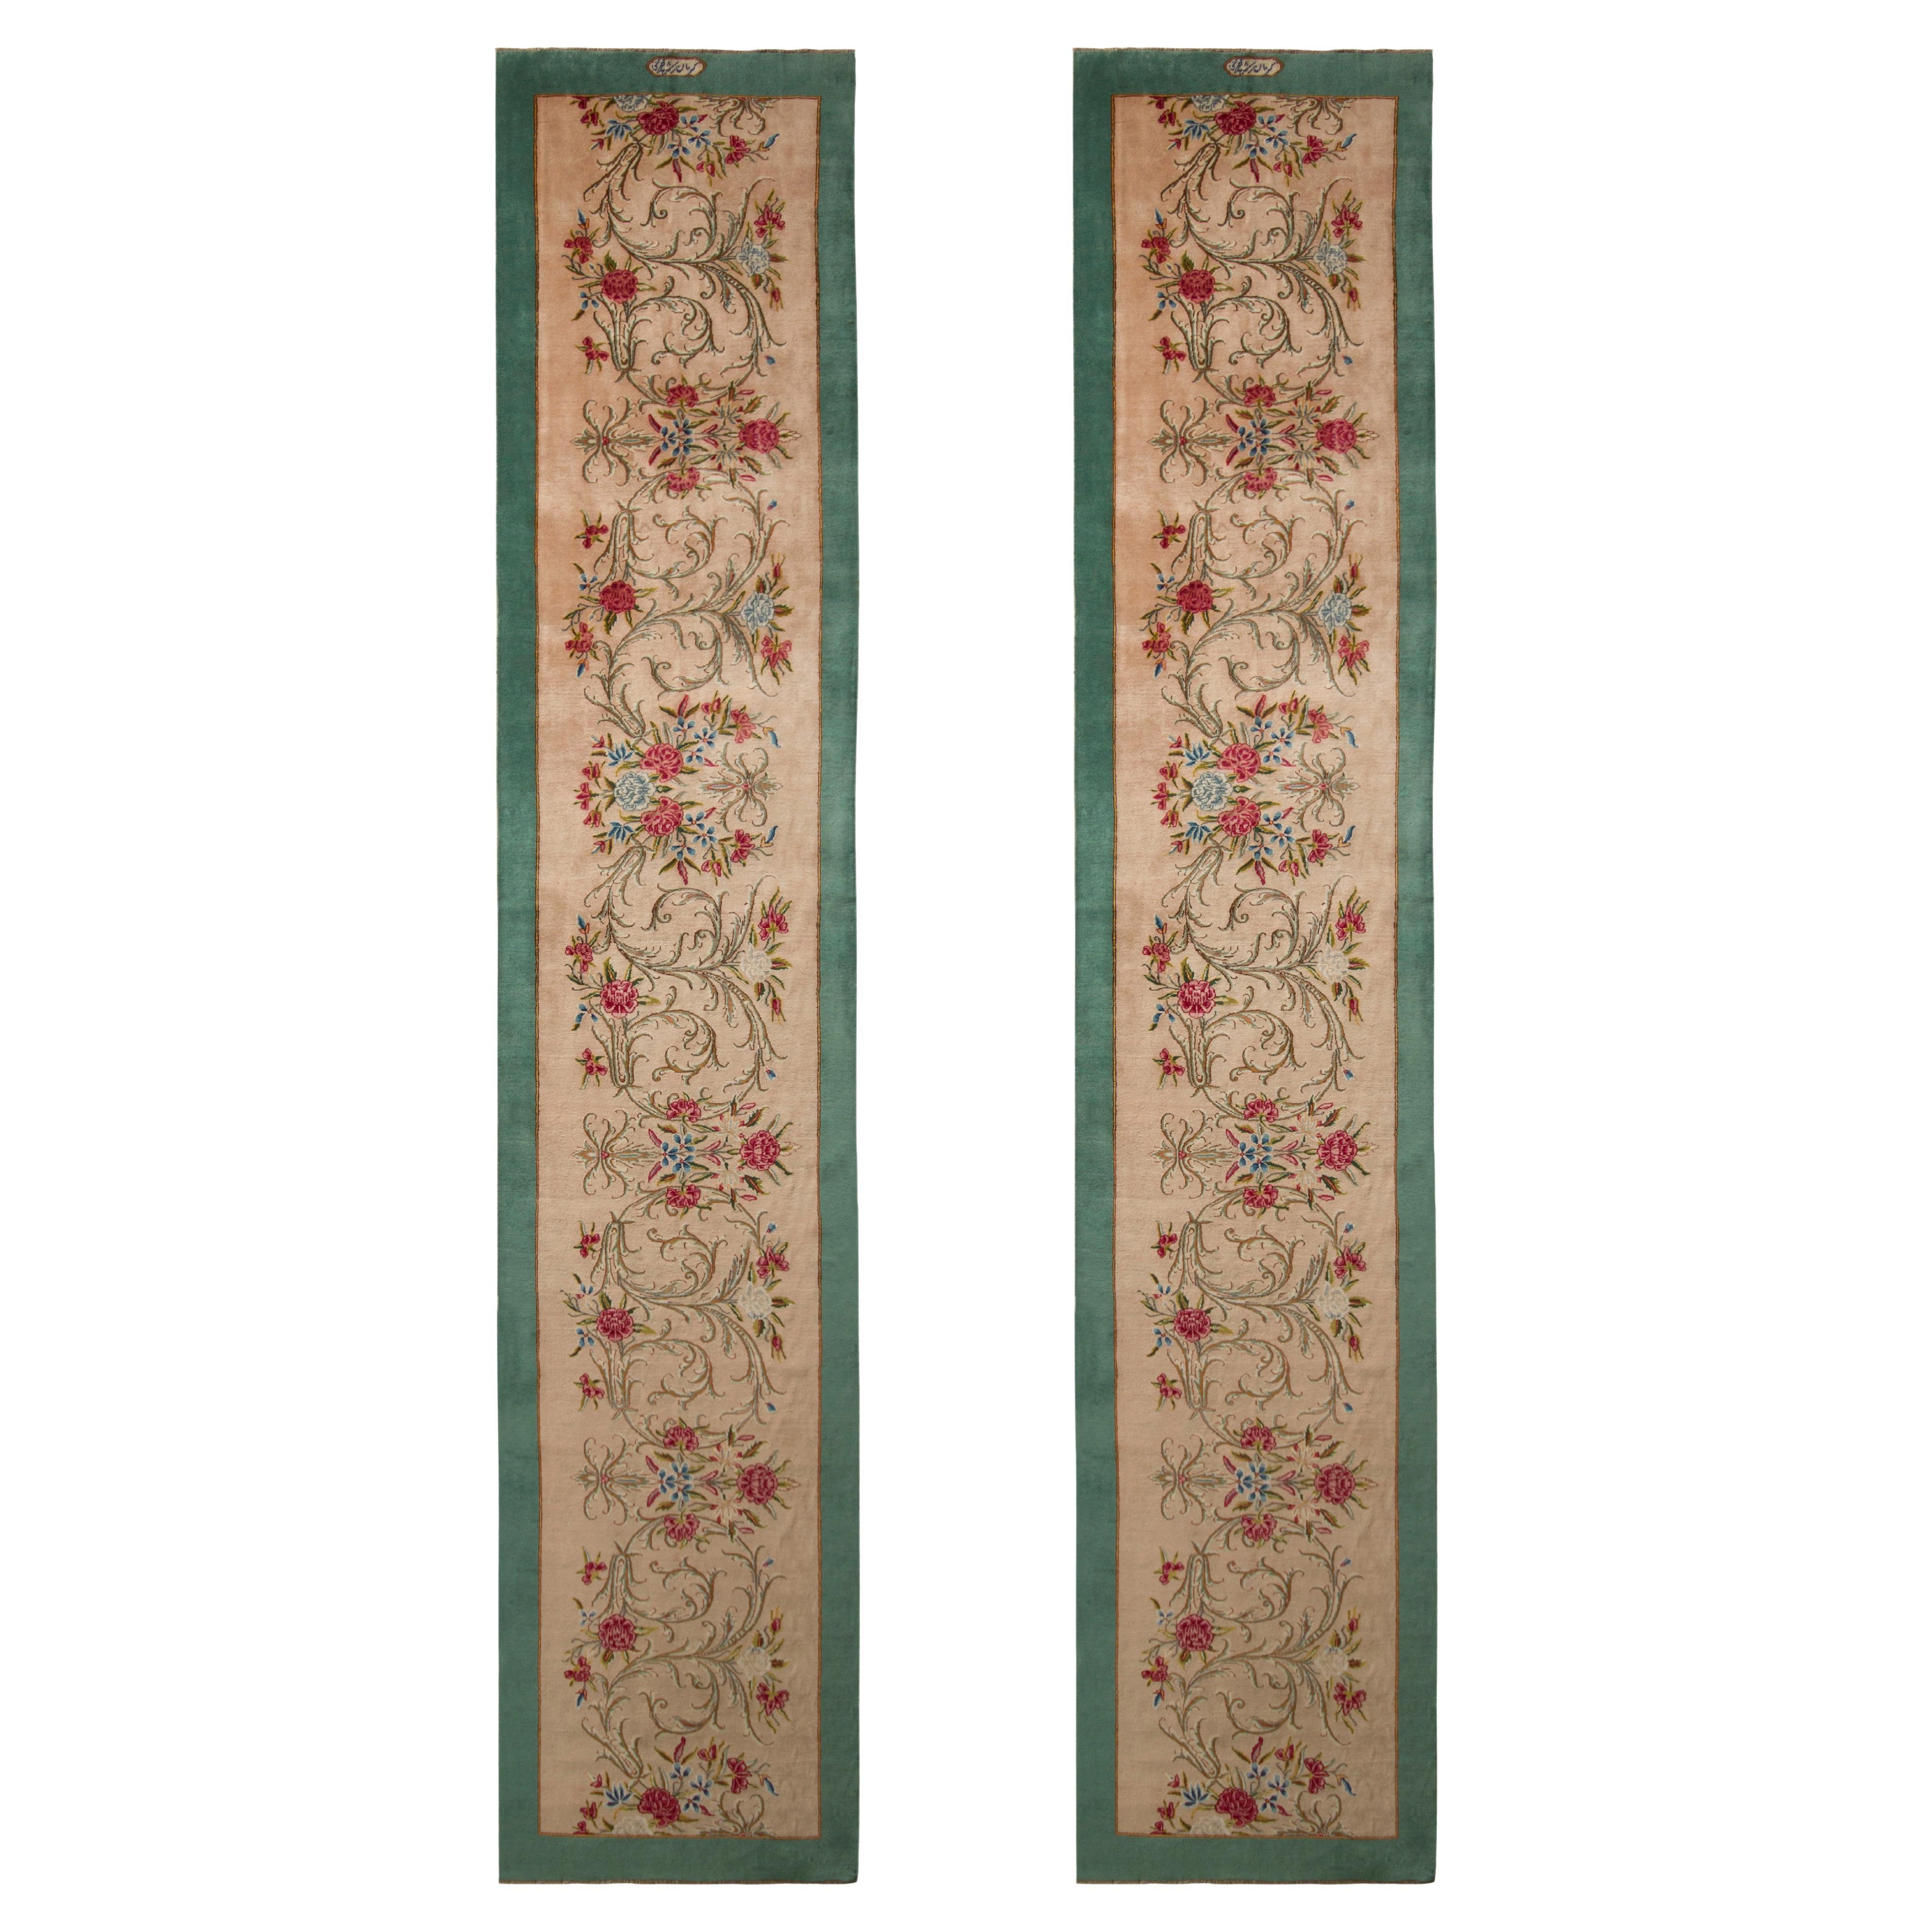 Vintage Signature Twin Persian Runners in Beige with Red & Green Floral Patterns